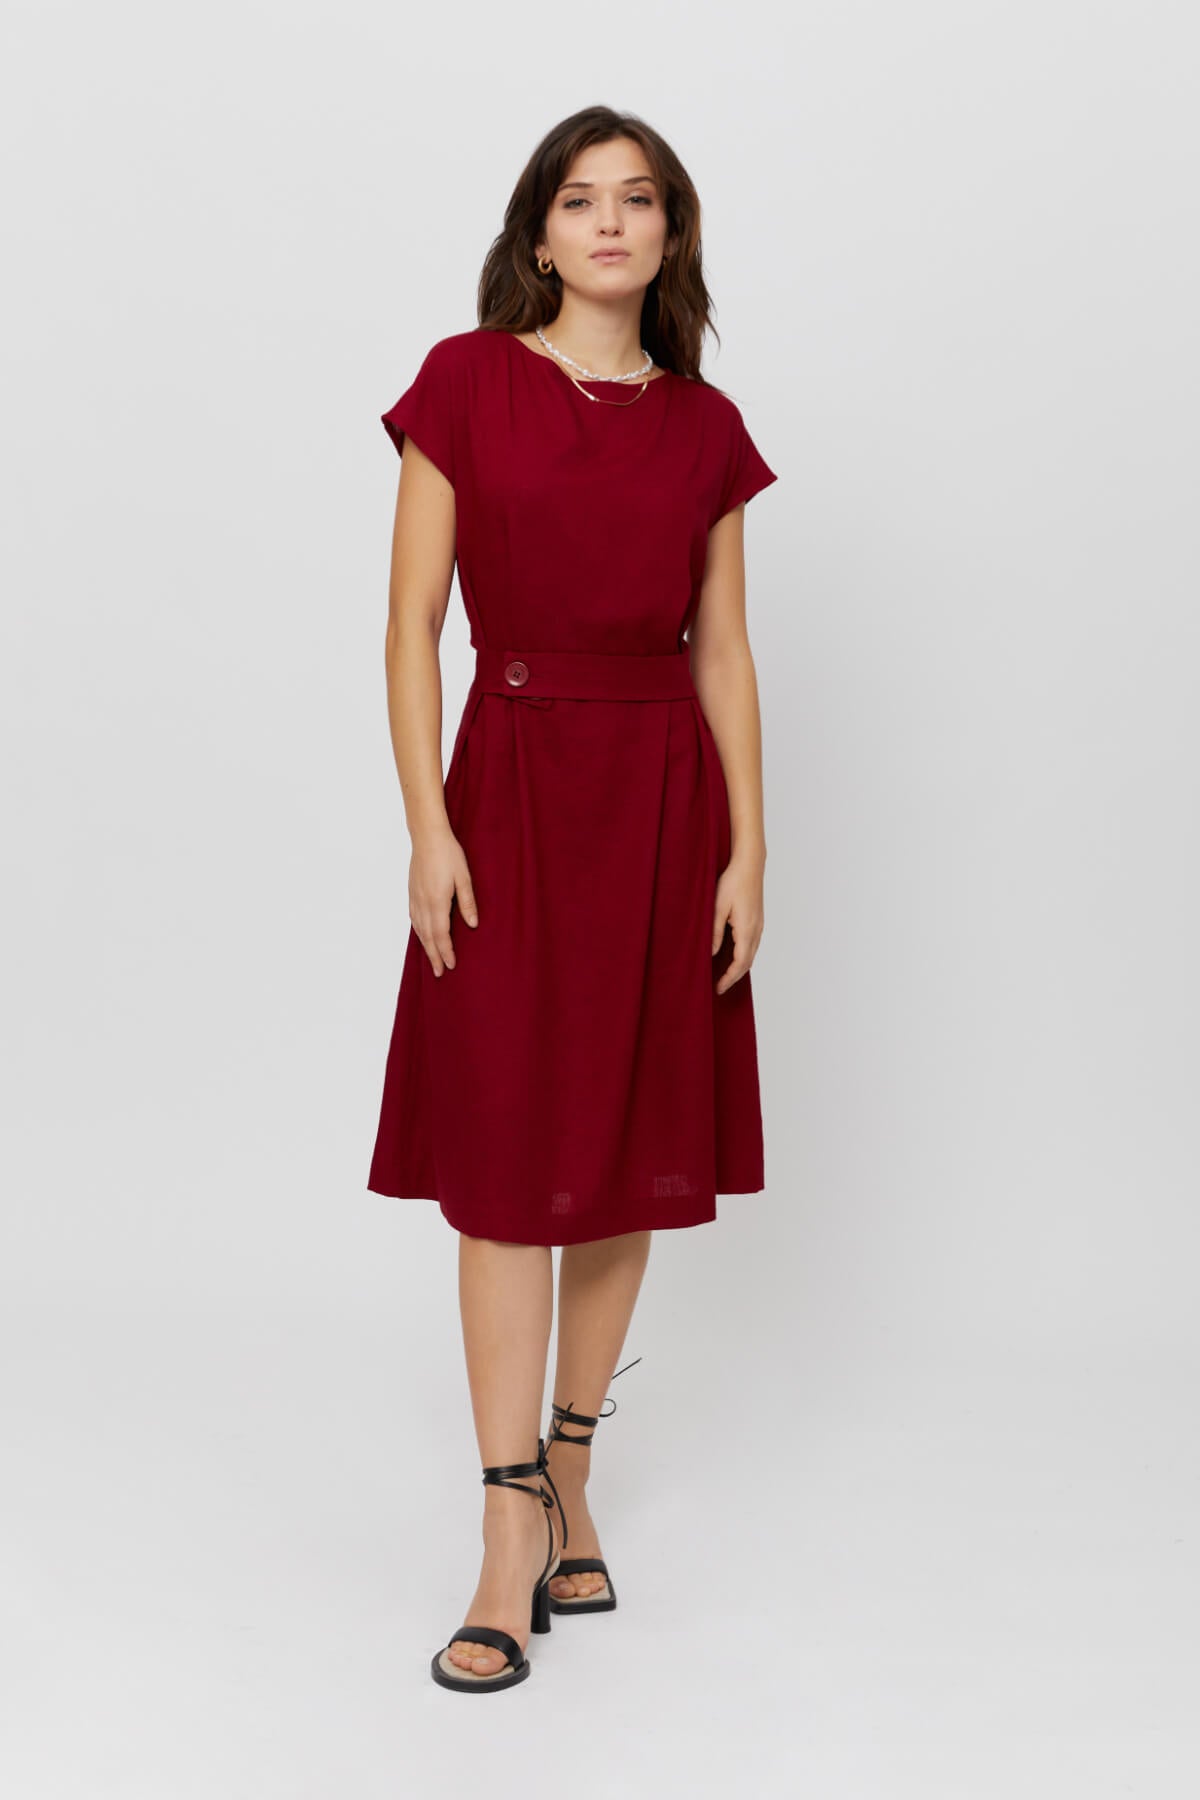 Red Linen Dress SATI · Summer Casual Midi A Line · Elegant Office Dress with Pockets - AYANI 